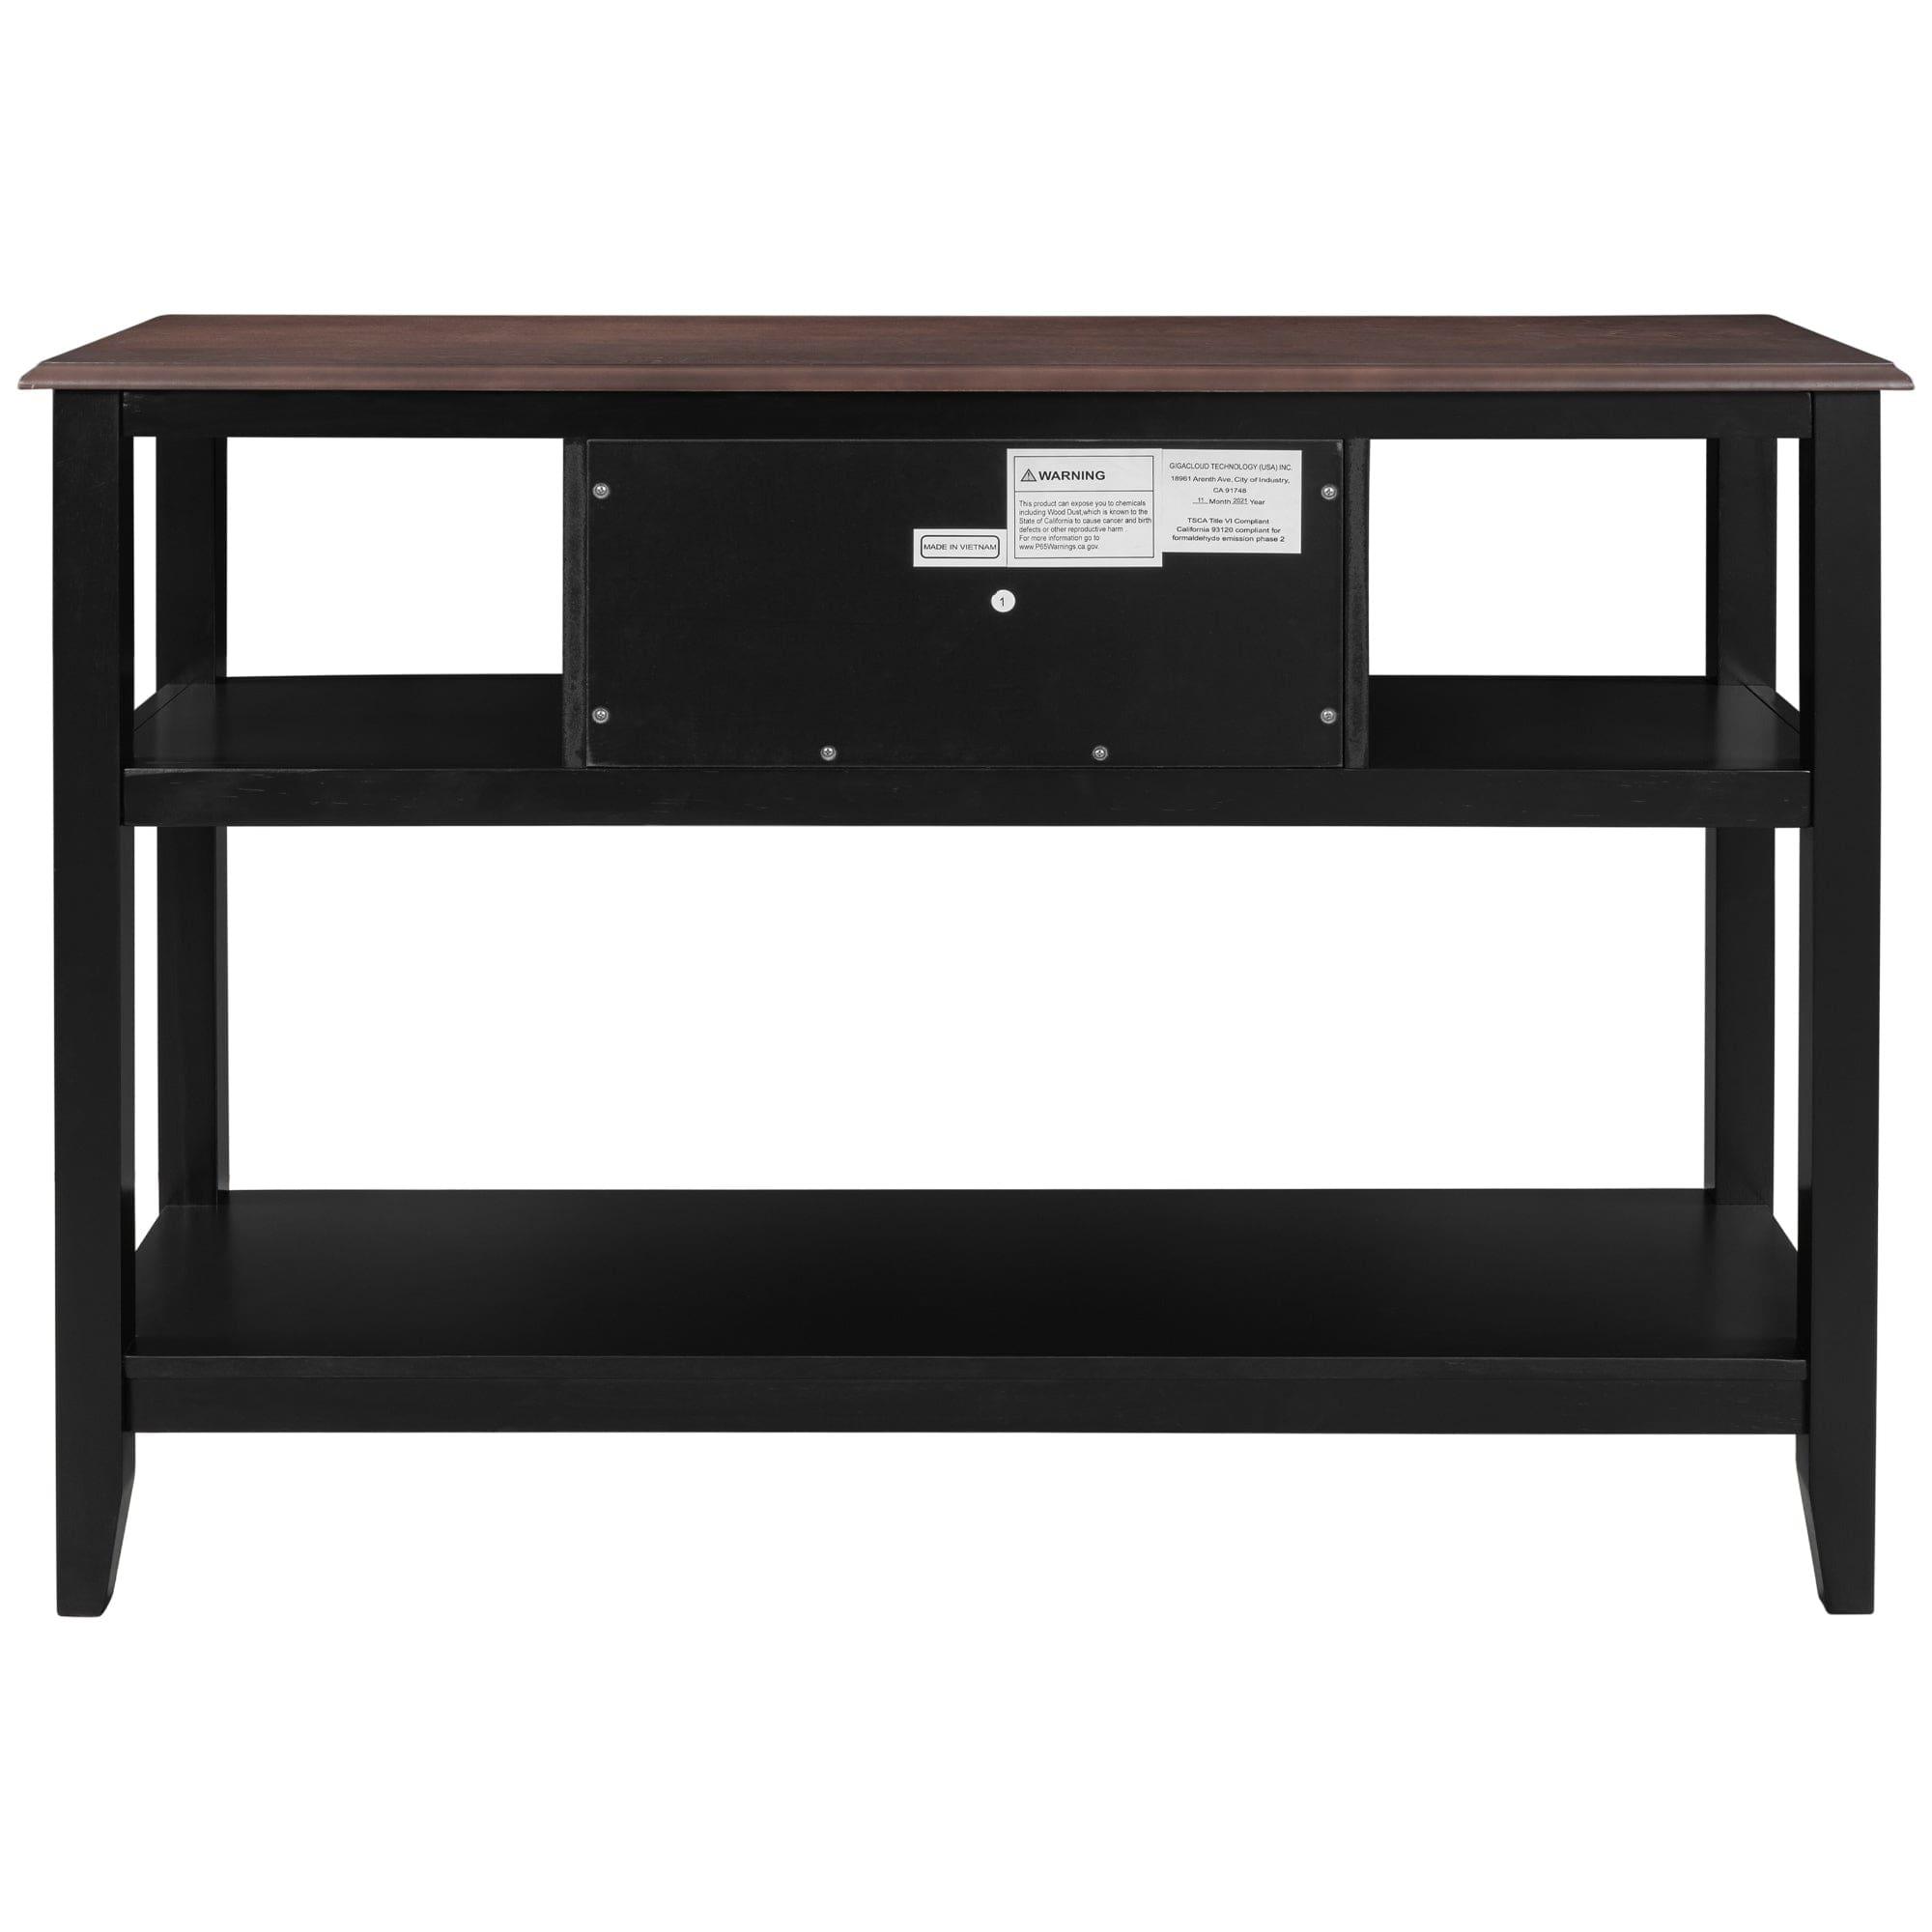 Shop TREXM Color-matched Console Table with 2 Drawers and Open Shelves for Living Room, Entryway (Black+Walnut) Mademoiselle Home Decor